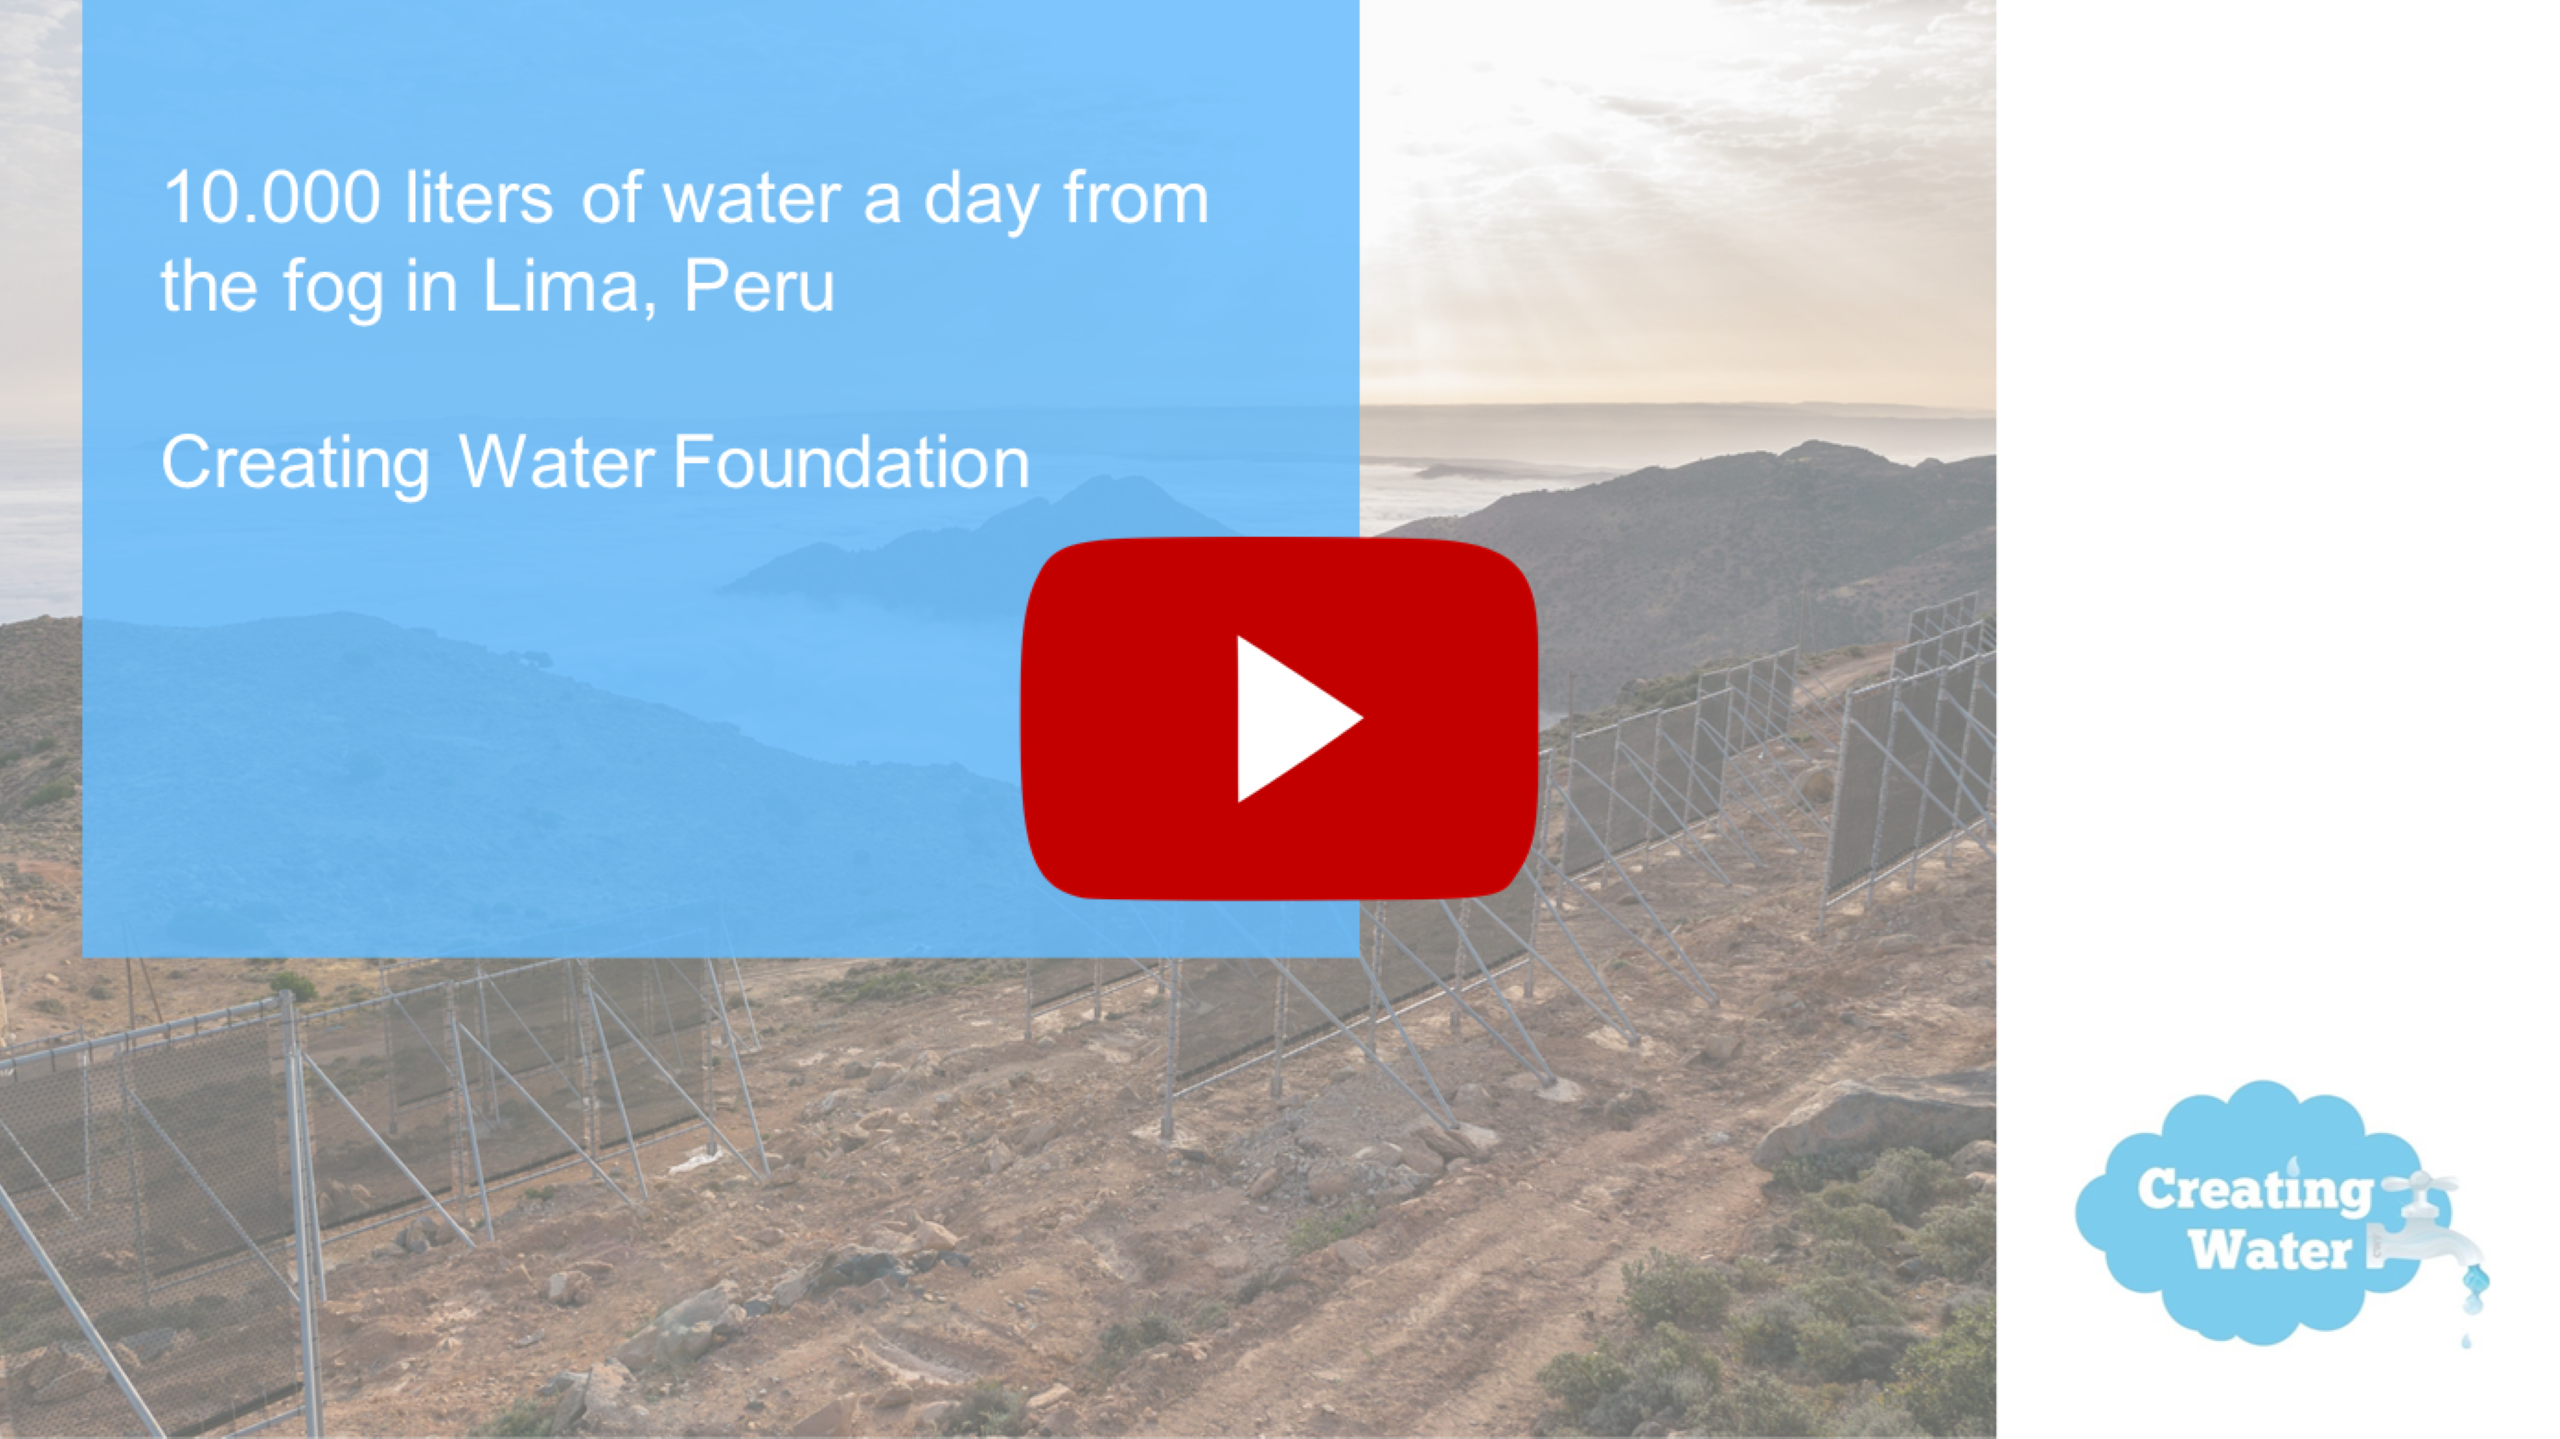 liters of water - creating water foundation